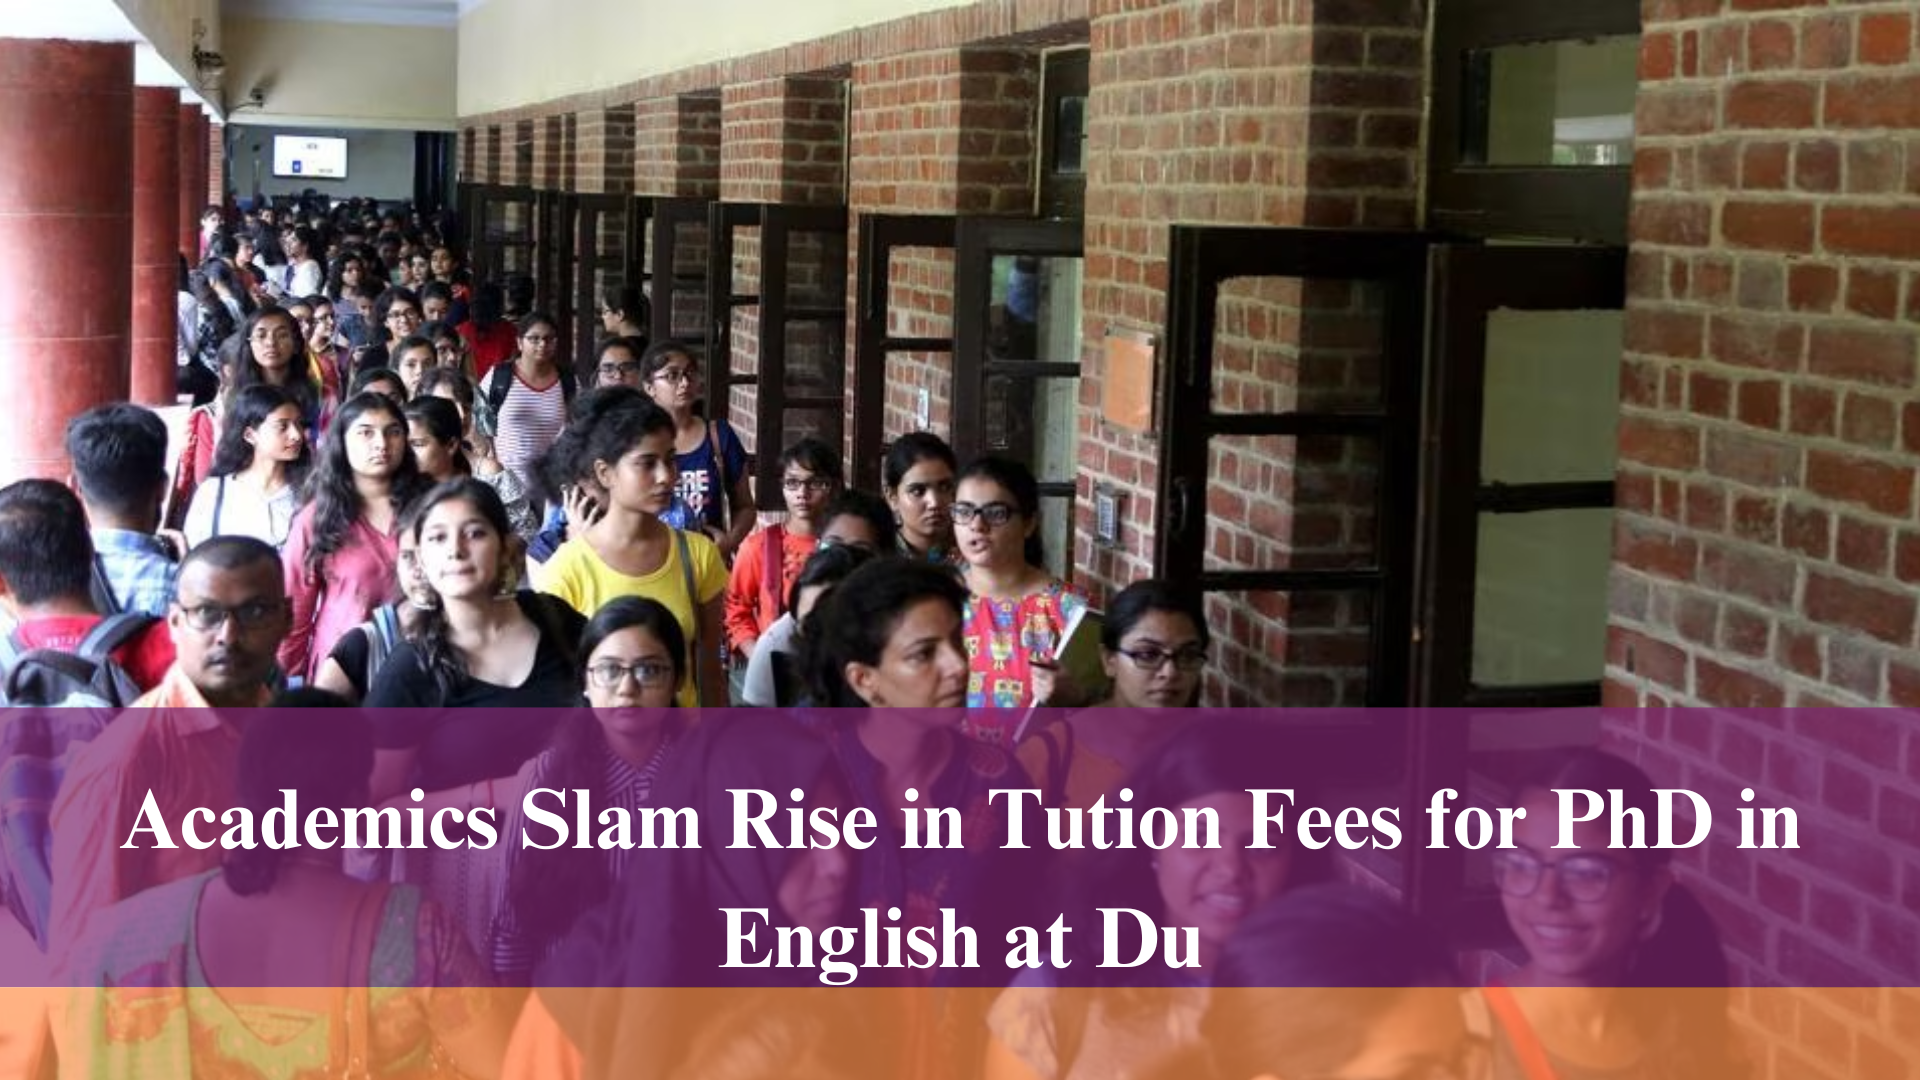 Academics Slam Rise in Tuition Fees For PhD in English at DU